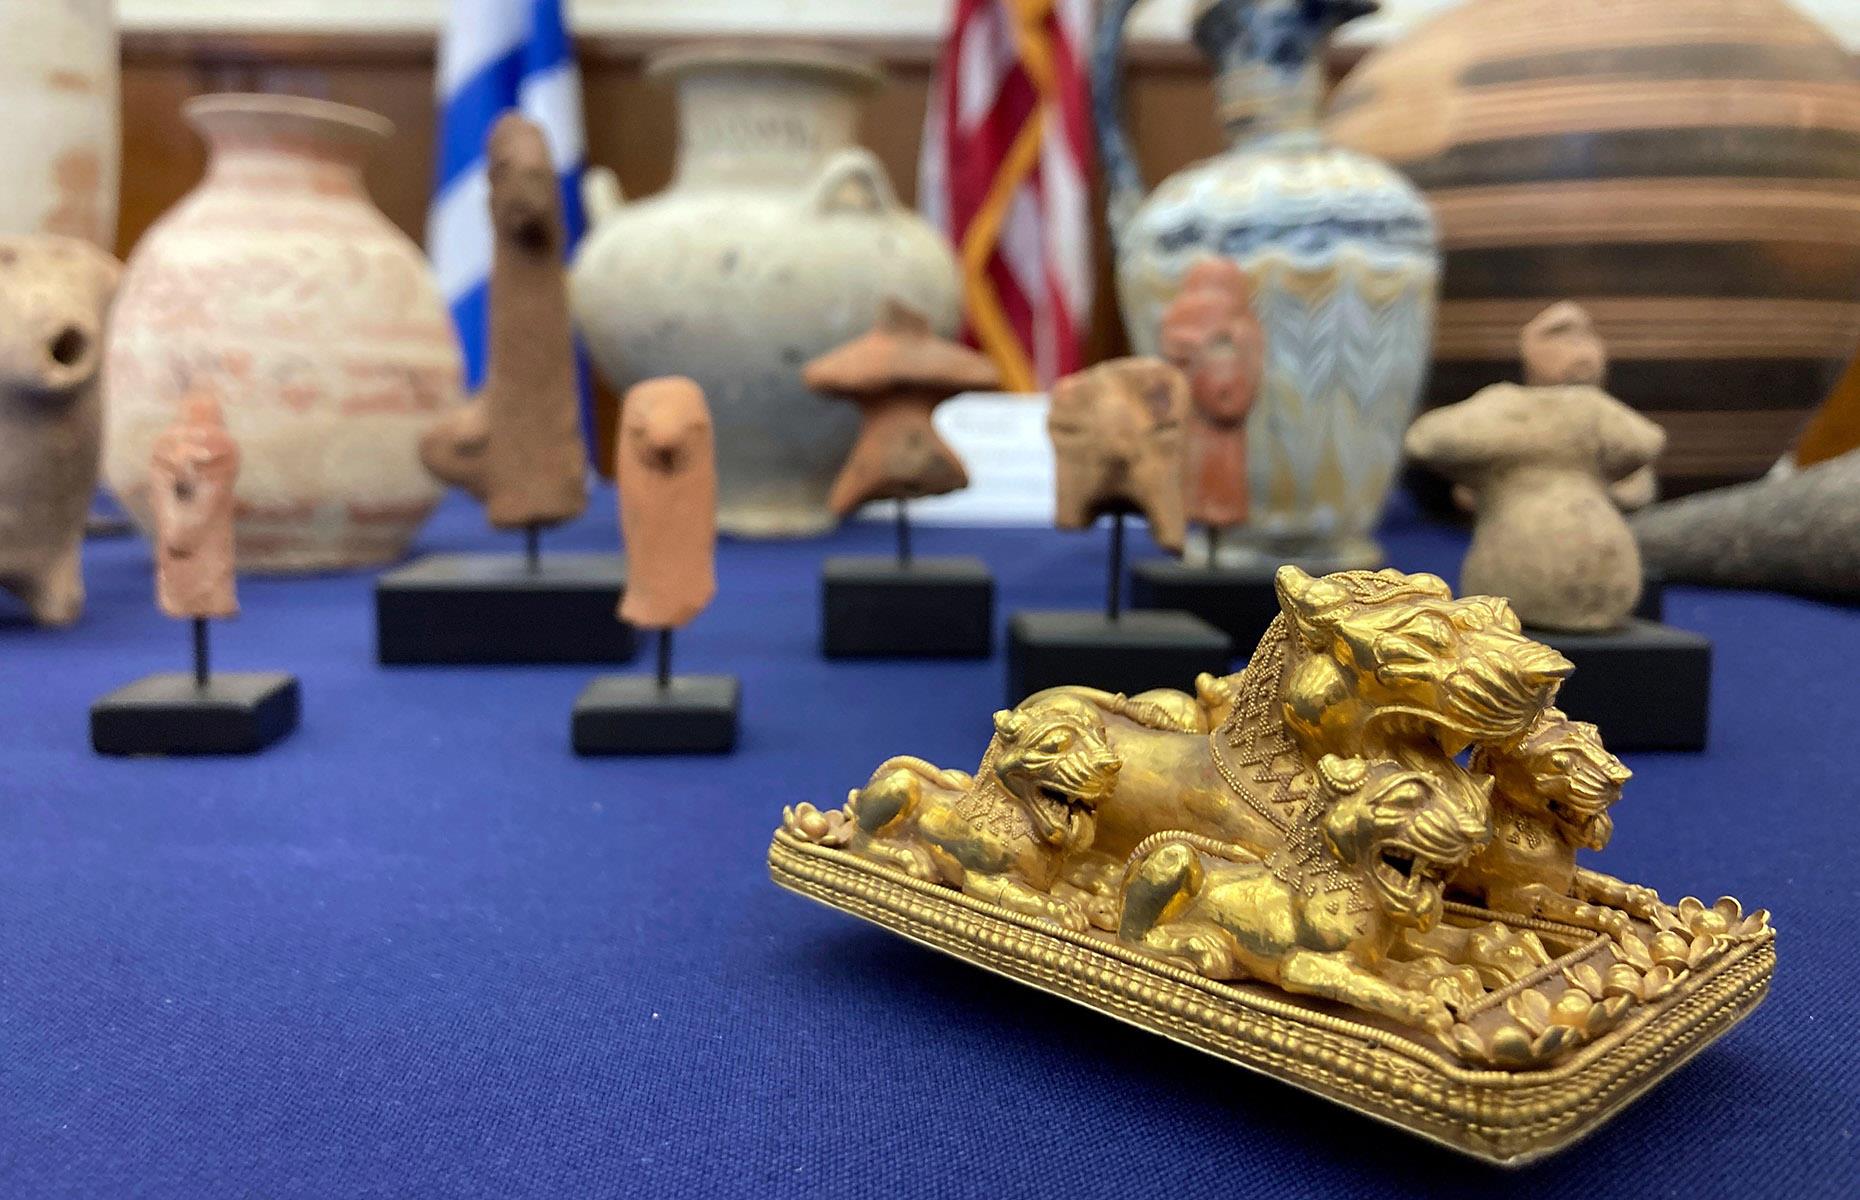 $70 million-worth of plundered antiquities